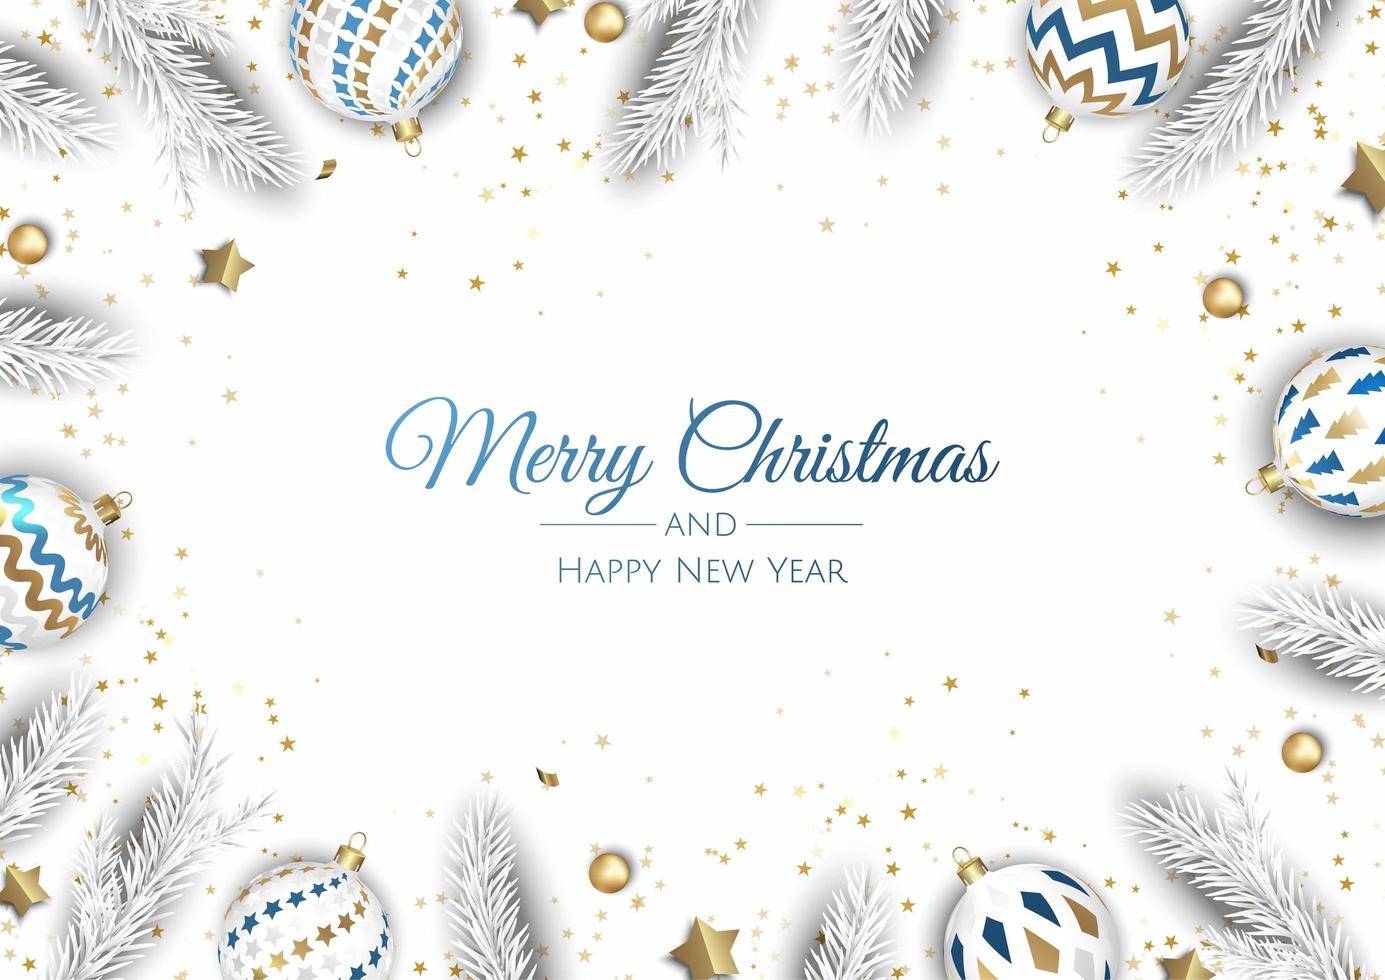 Merry Christmas and Happy New Year. Xmas background with Snowflakes and balls design. vector